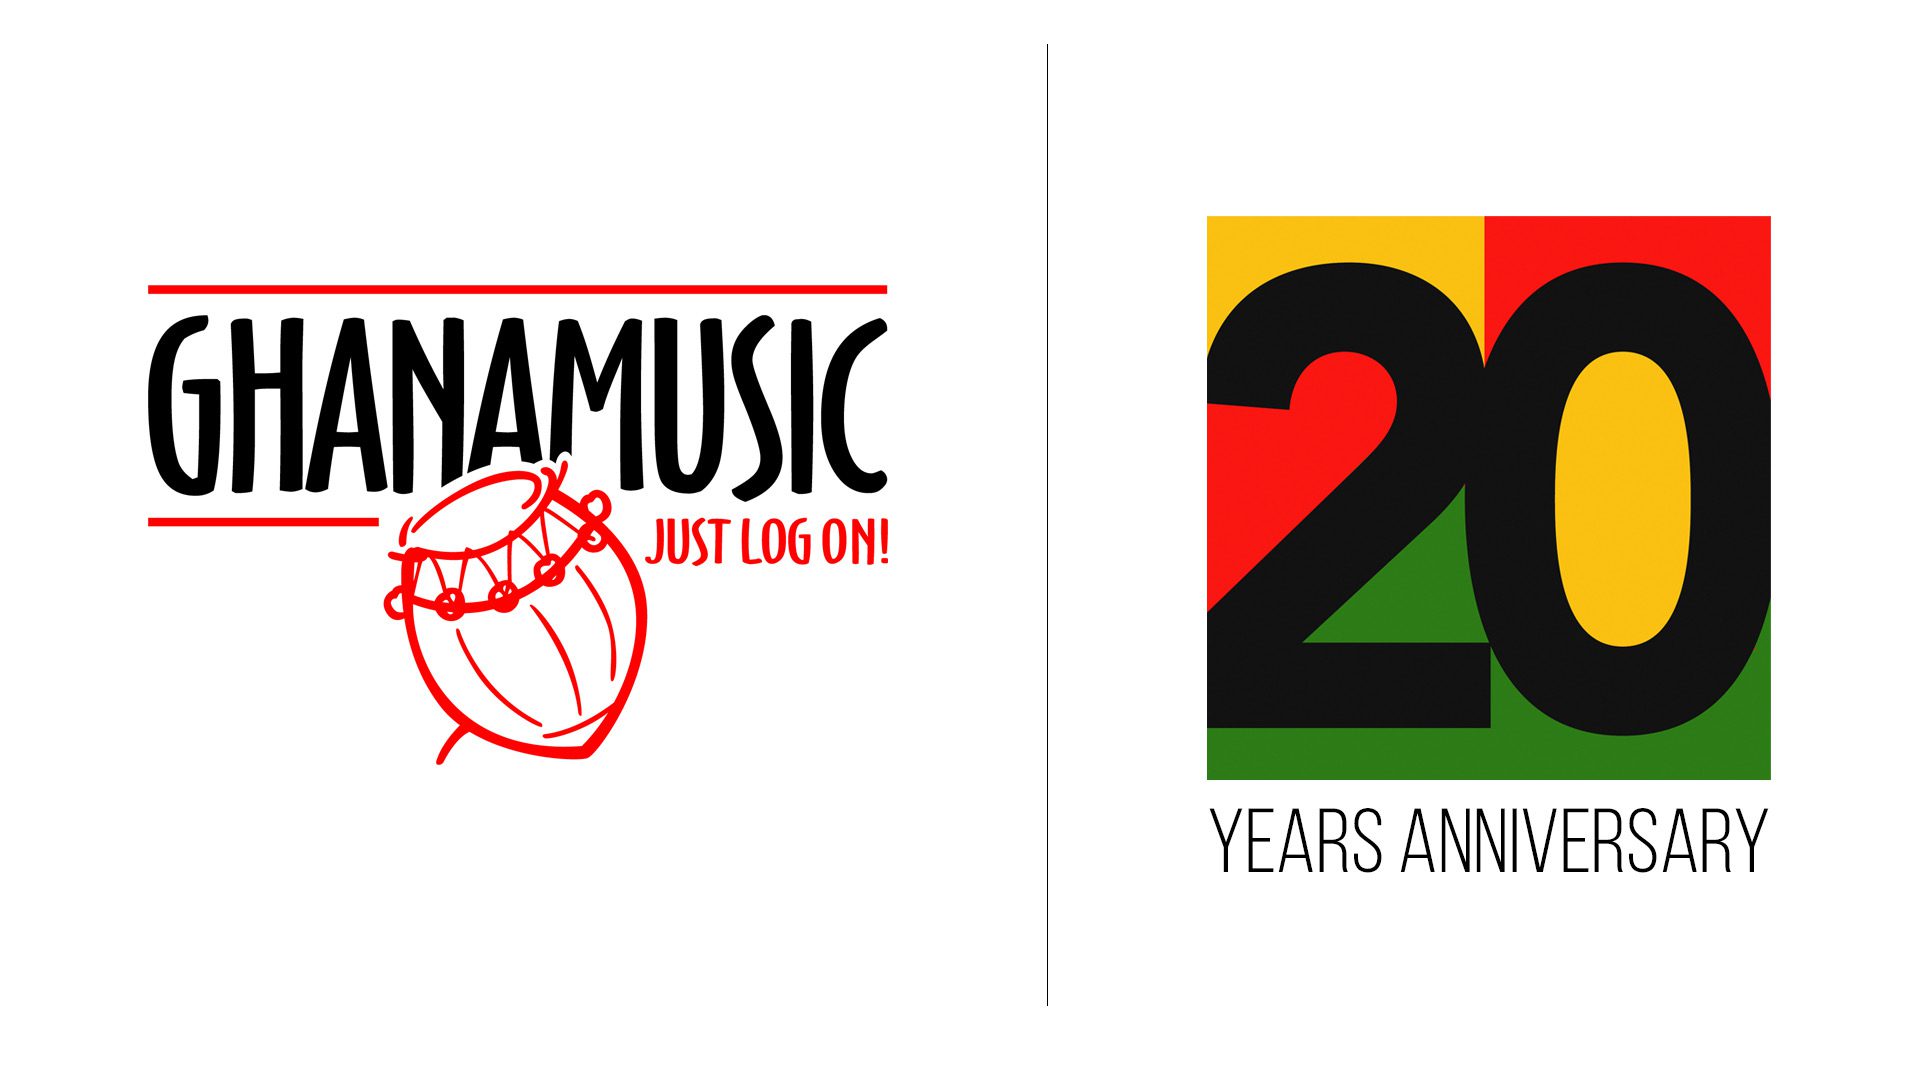 GhanaMusic.com marks 20 years of promoting strictly Ghanaian music content online